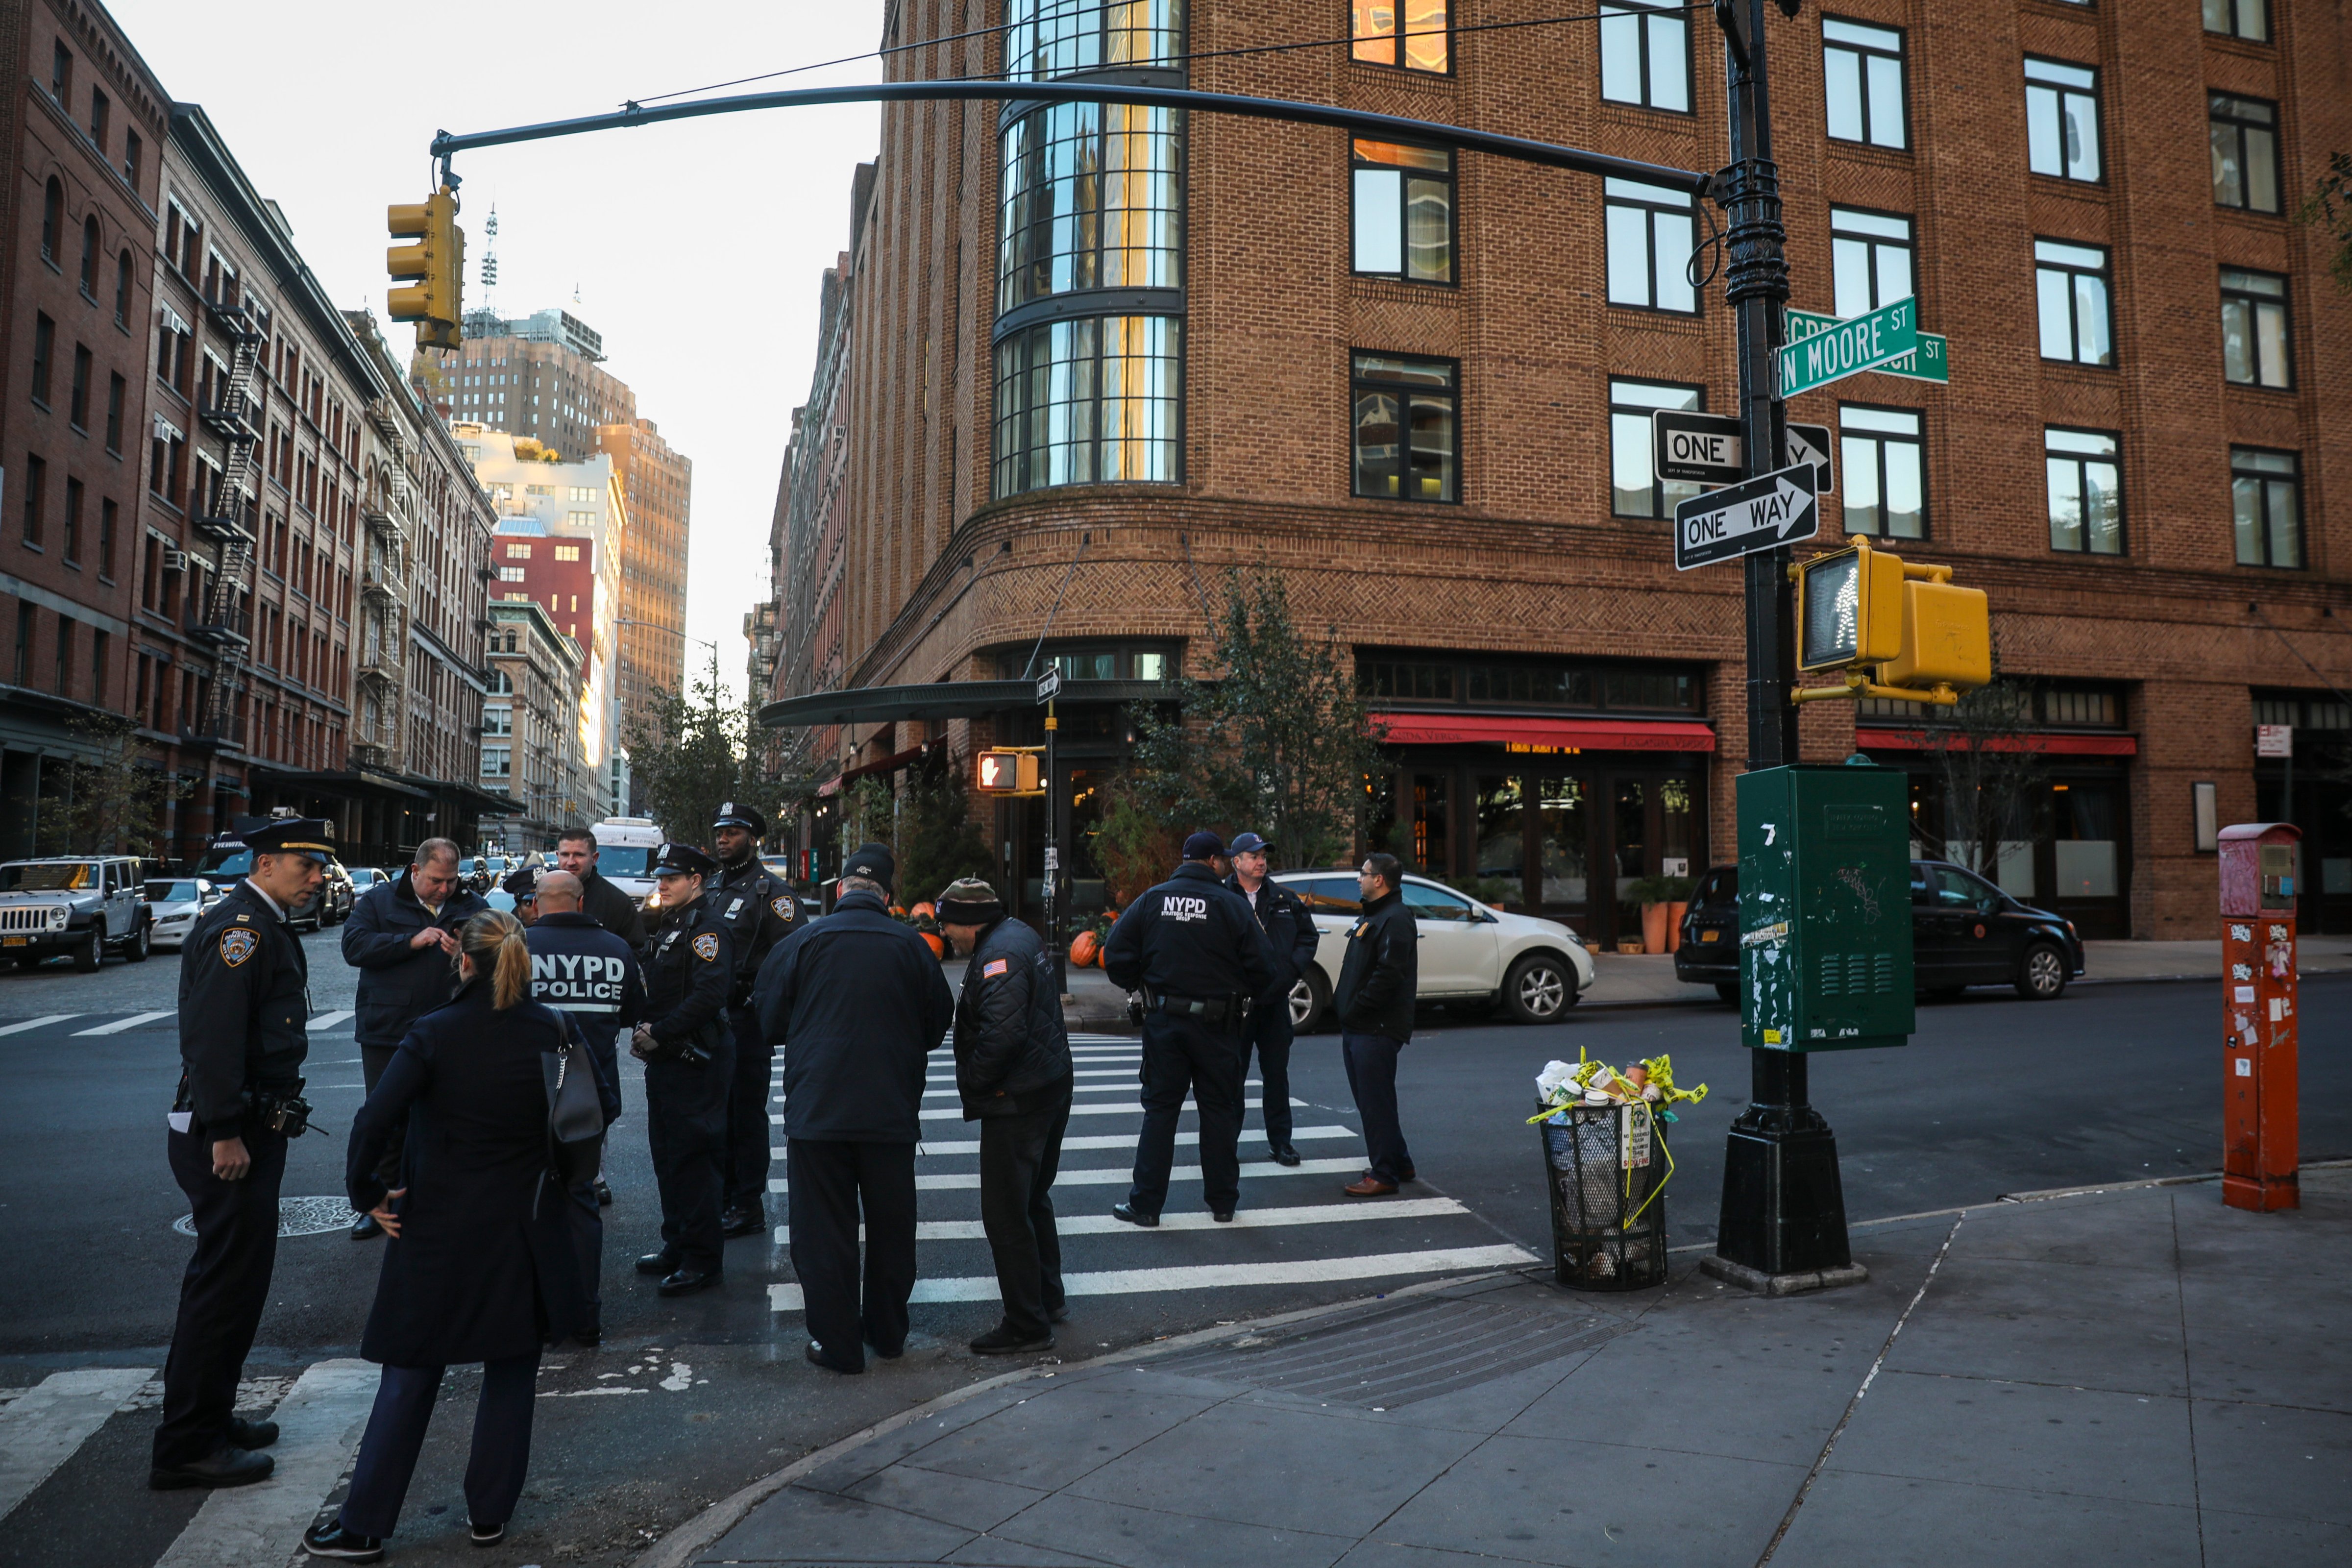 Police gather near the scene of where another package bomb was found early Thursday morning at Robert De Niro's Tribeca Grill restaurant, October 25, 2018 in New York City. (Drew Angerer—Getty Images)